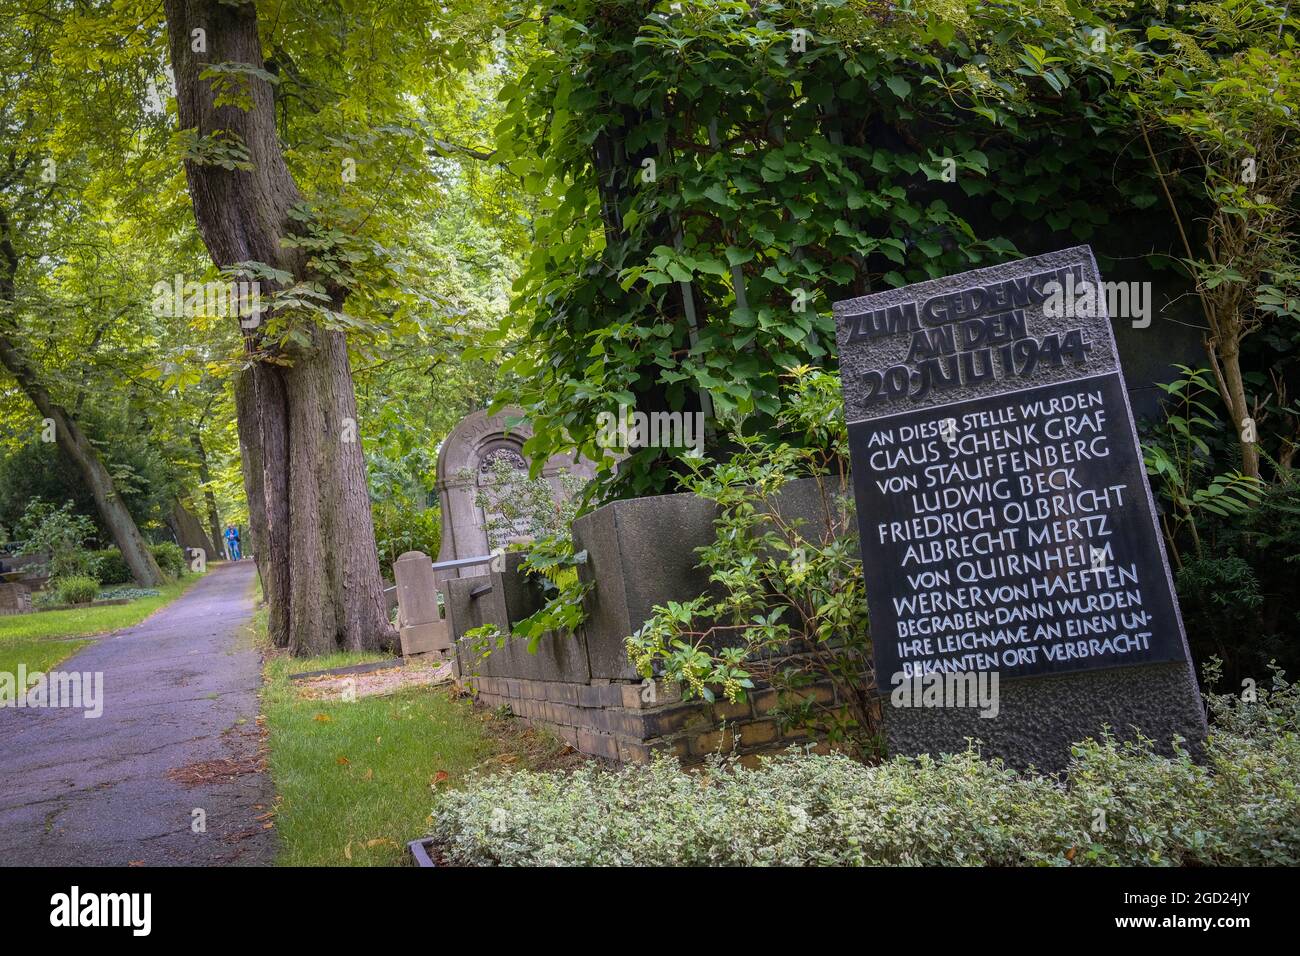 In St. Matthew's Churchyard, a memorial stone has been erected for the resistance fighters of the July 20, 1944 assassination of Hitler. Stock Photo